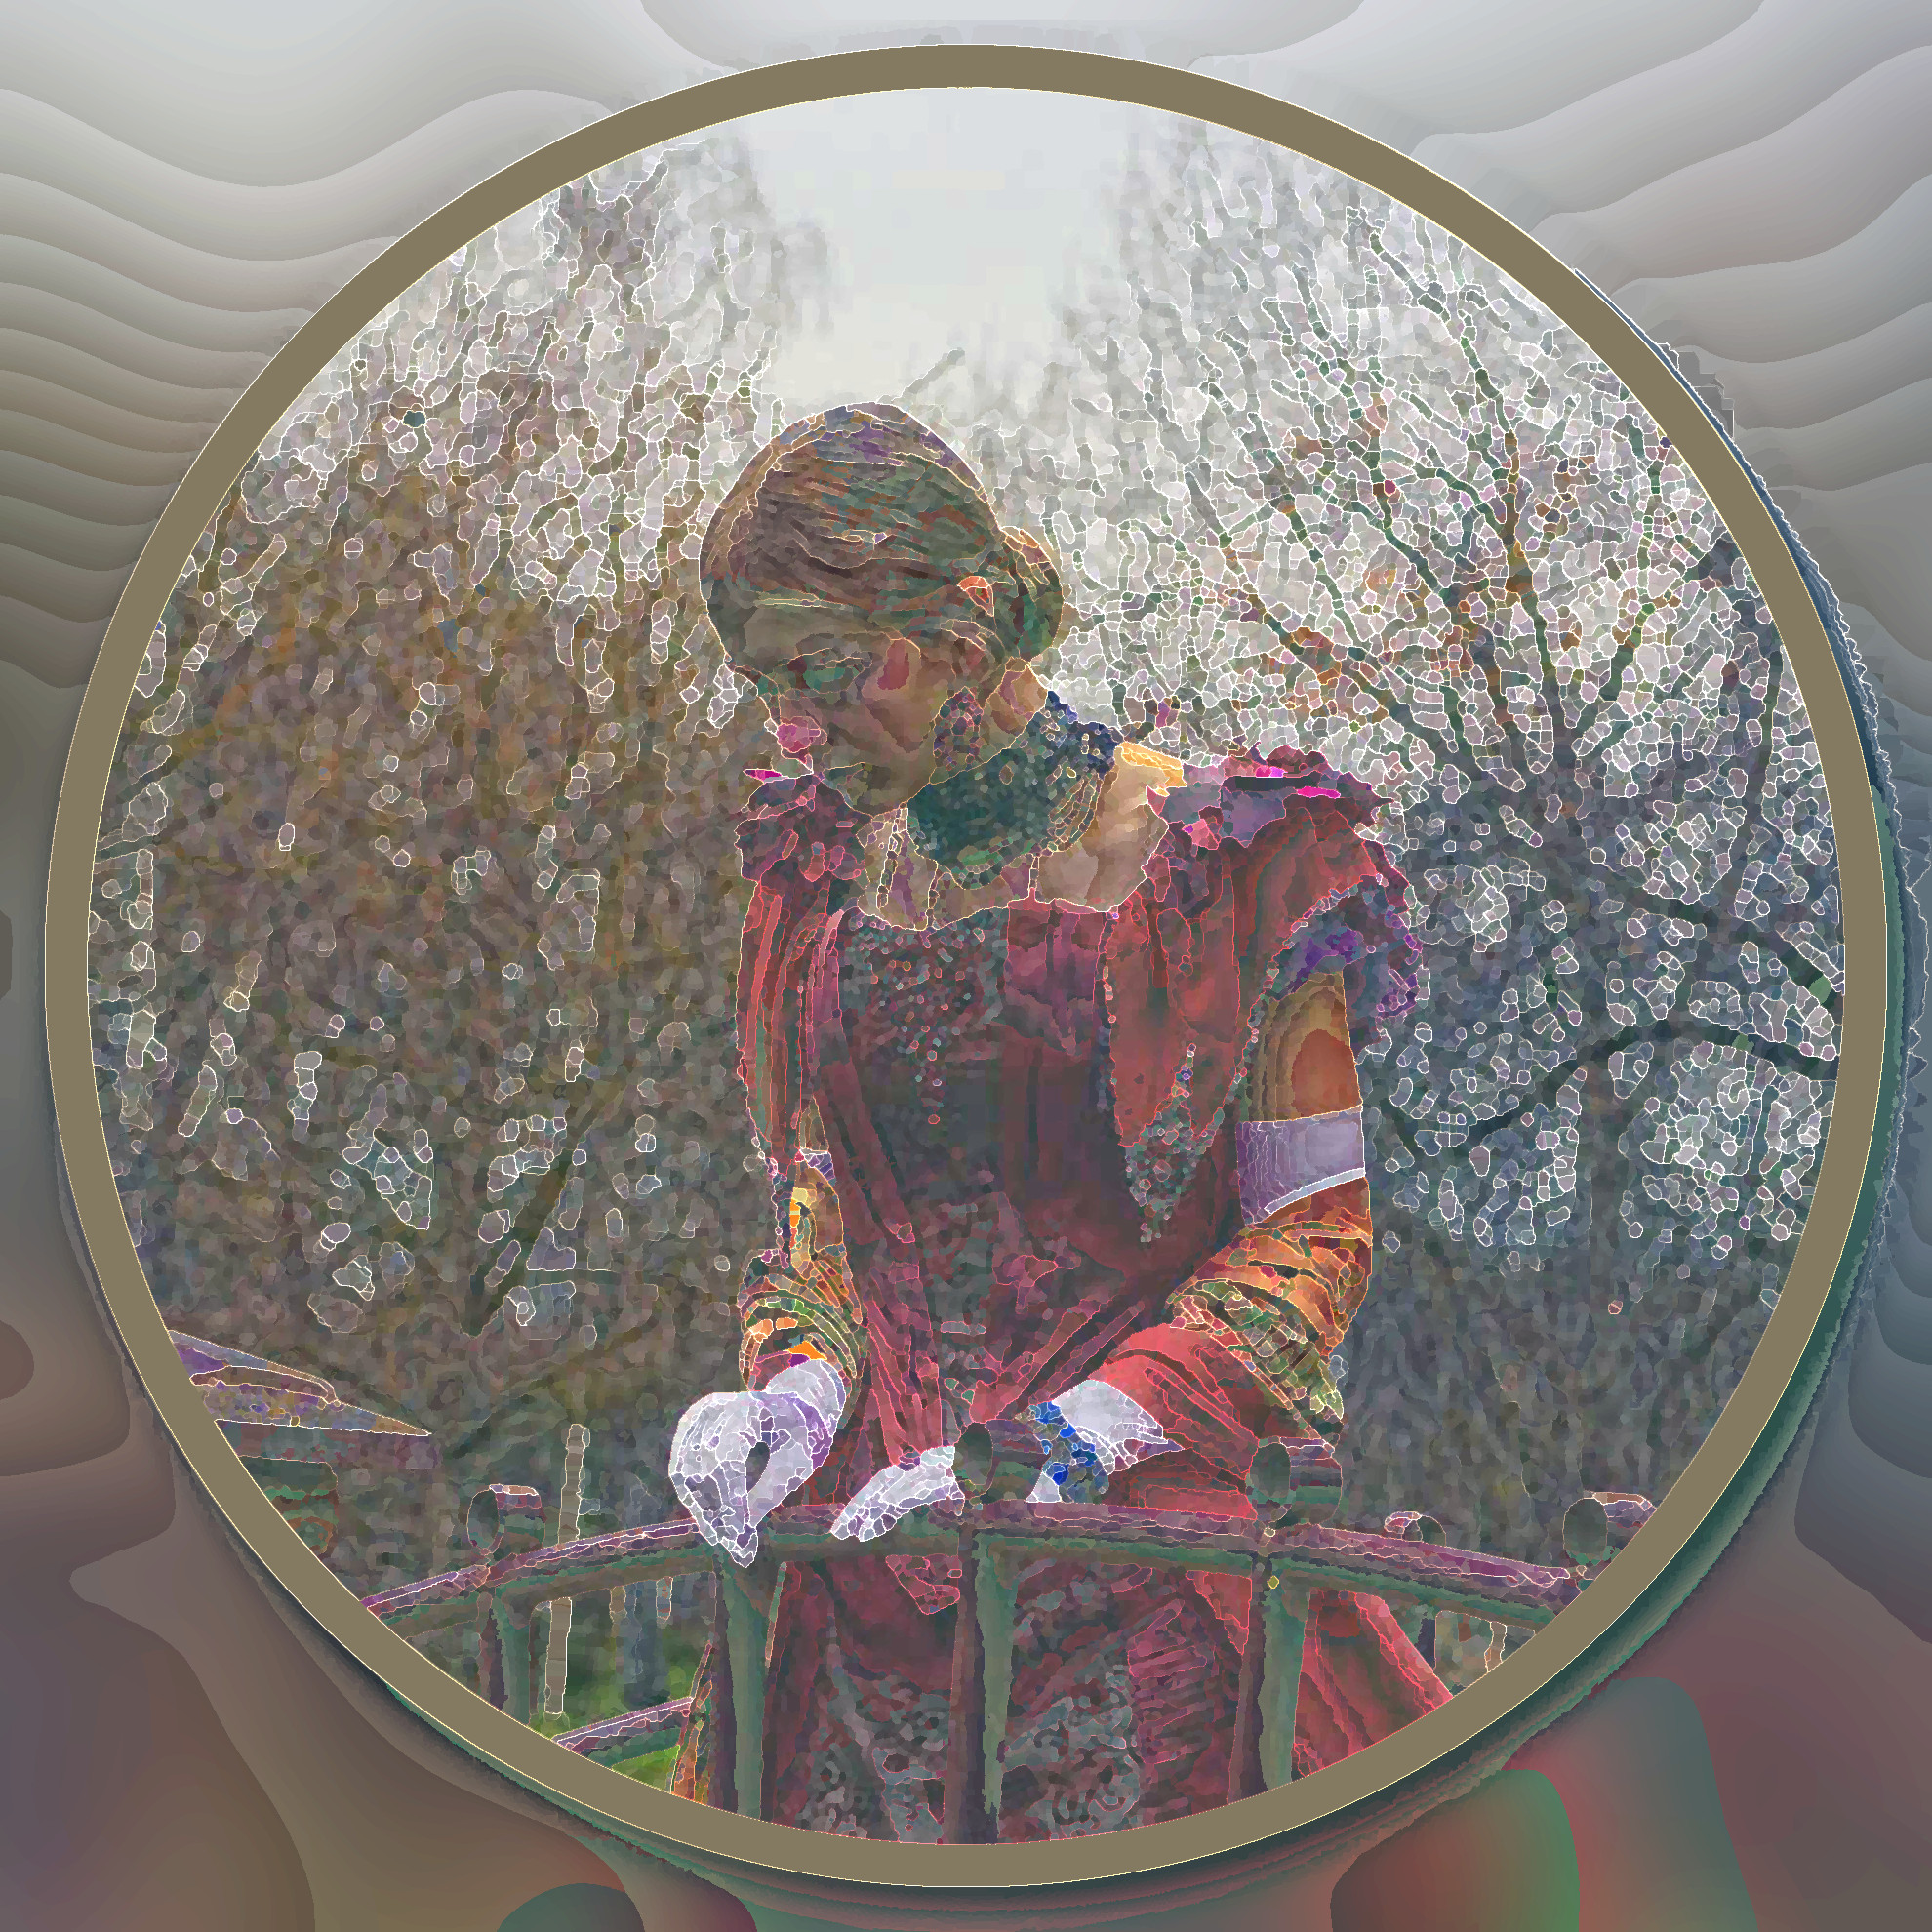 2023-05-30 13-55-36dark_red_victorian_dress_by_aquilina108_dbznjgo-fullview_portrait with a framed Artistic effect, style PosterEdges.jpg